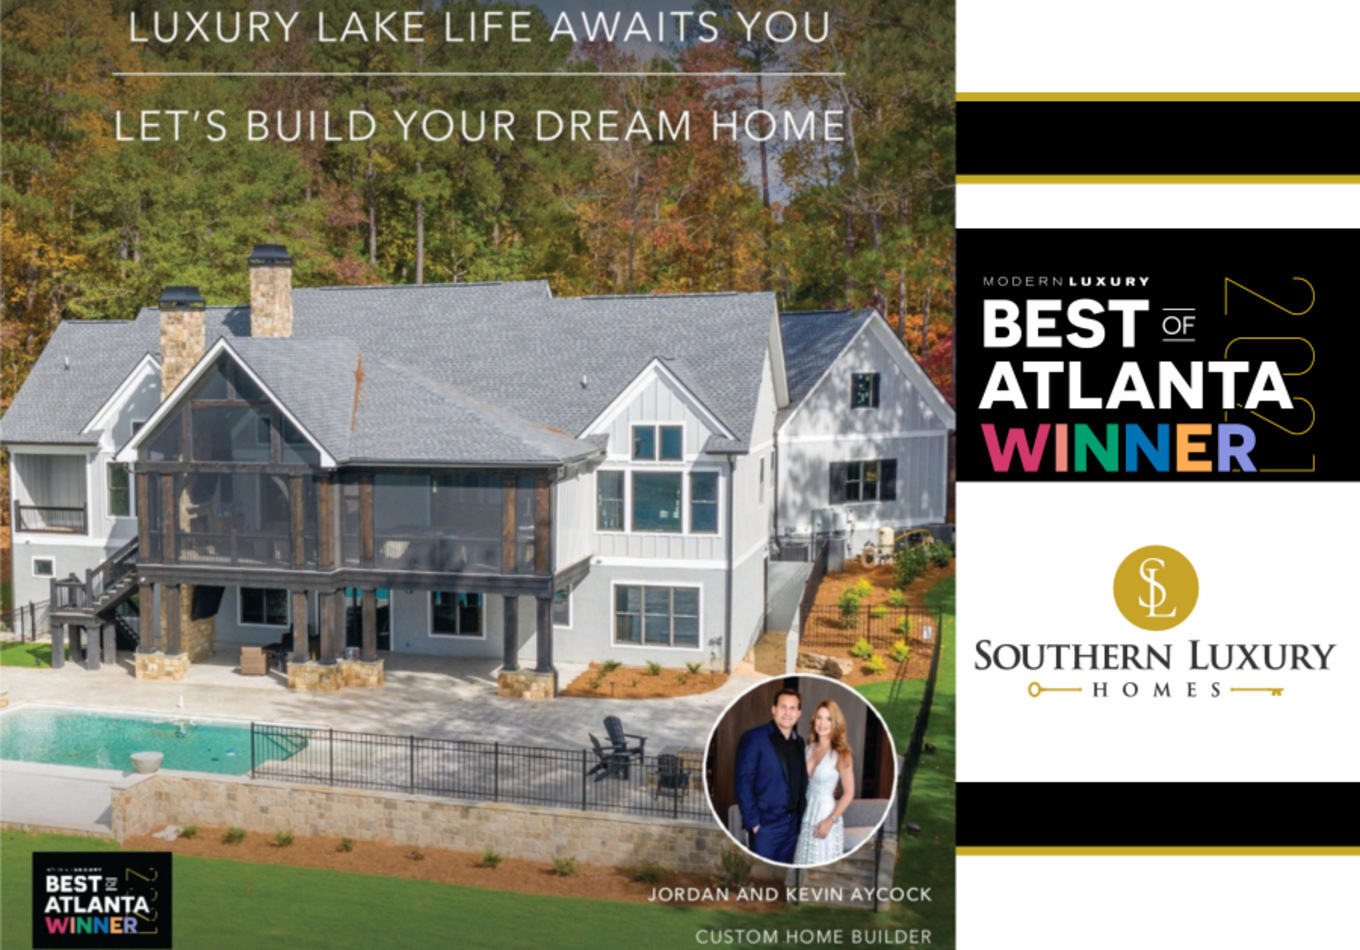 Southen Luxury Homes, Thursday, September 16, 2021, Press release picture